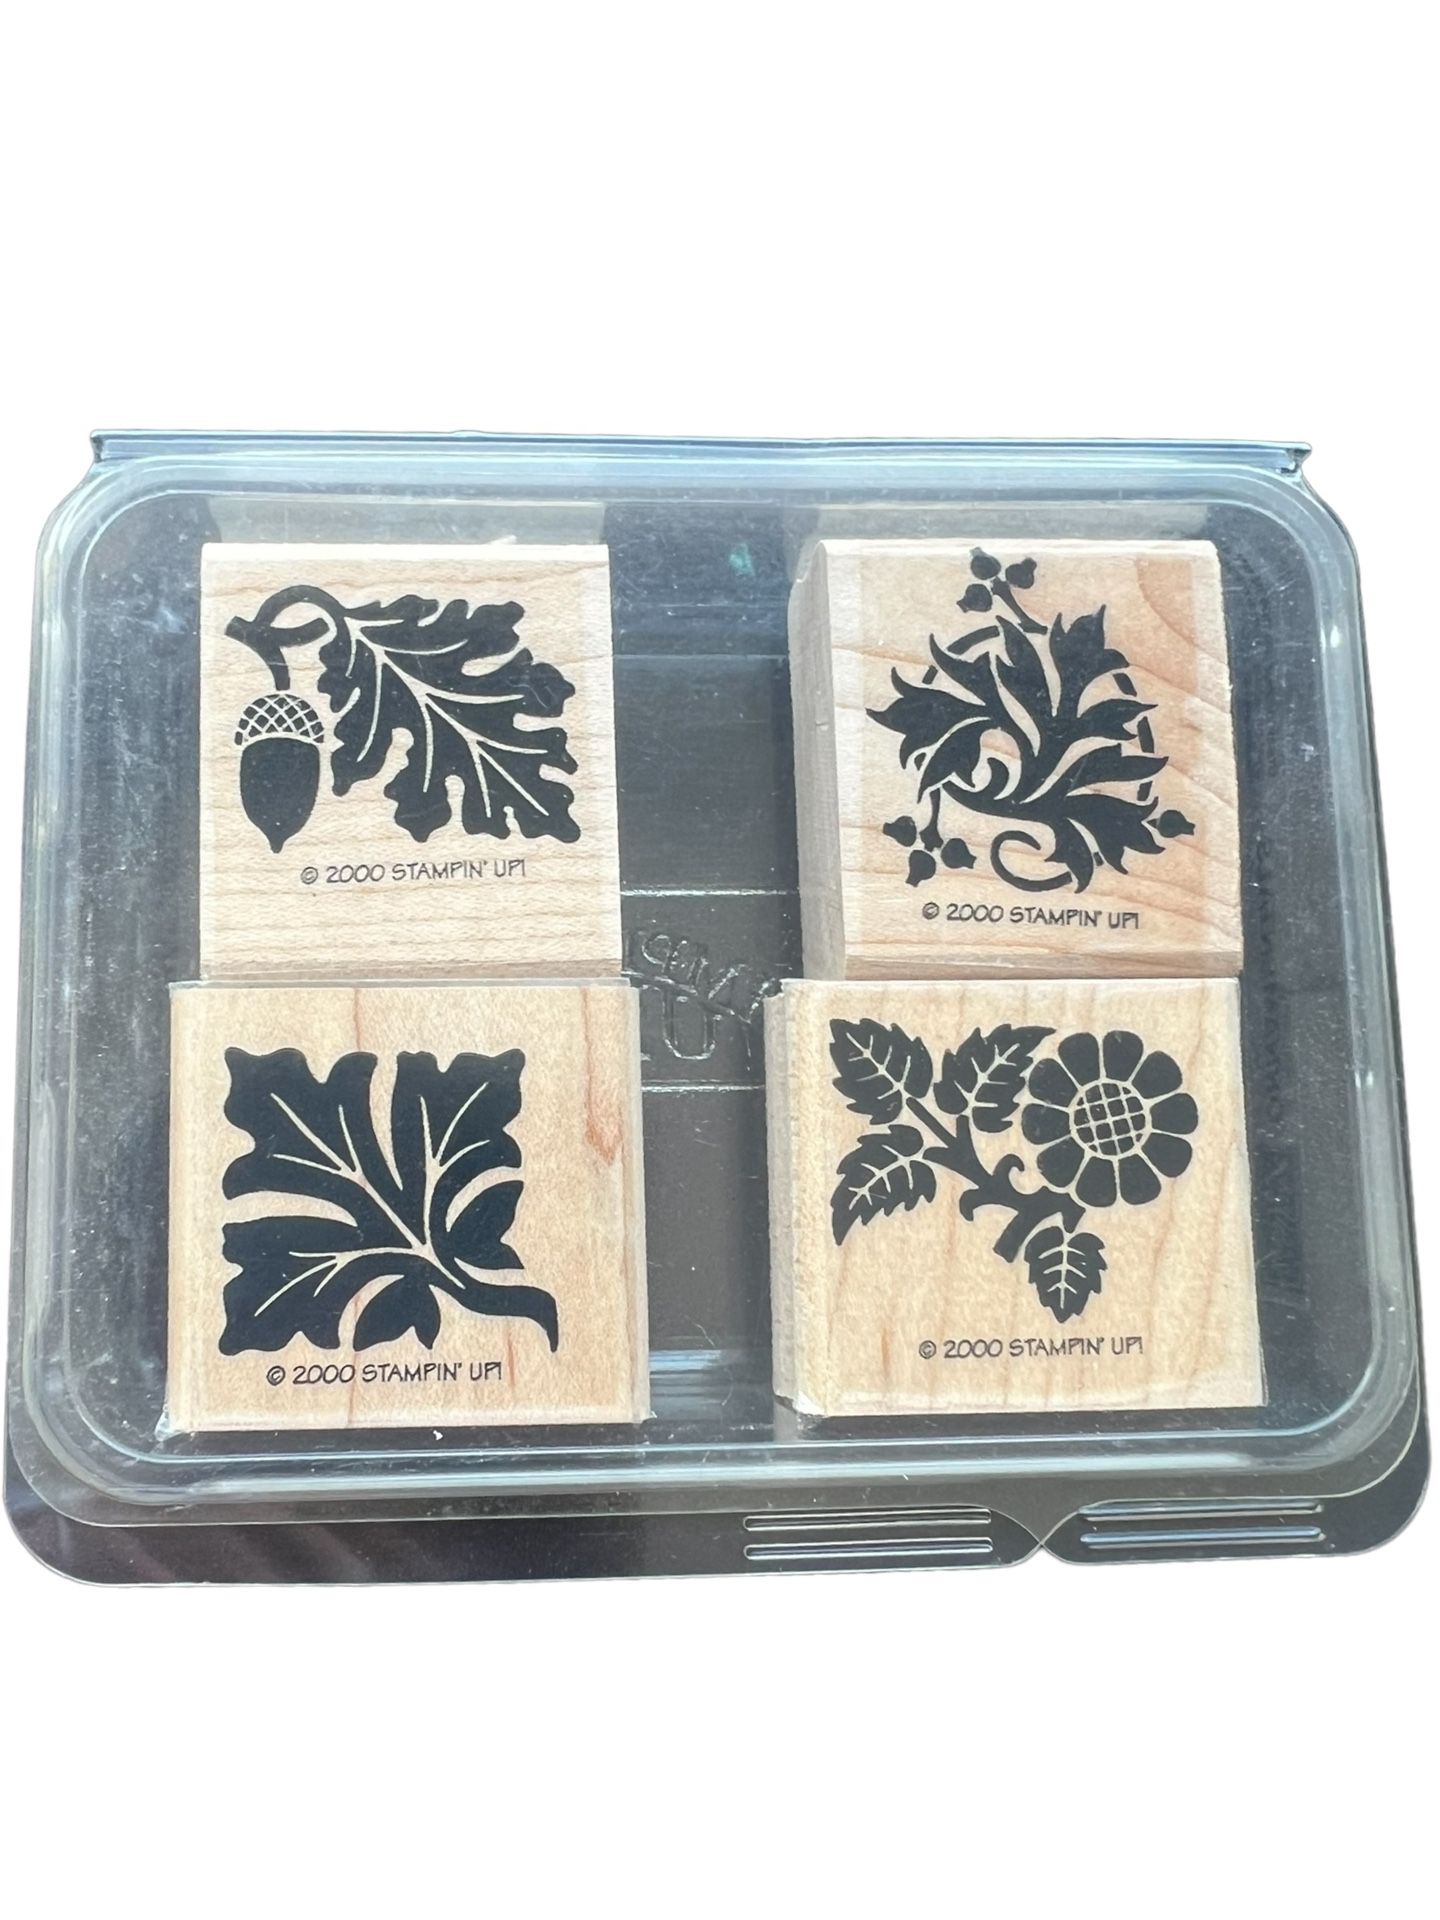 Stampin Up Rubber Stamps Ornamentals Set of 4 Wood Mounted Leaves Filigree Acorn  Add a touch of elegance to your crafts with this set of four Stampin